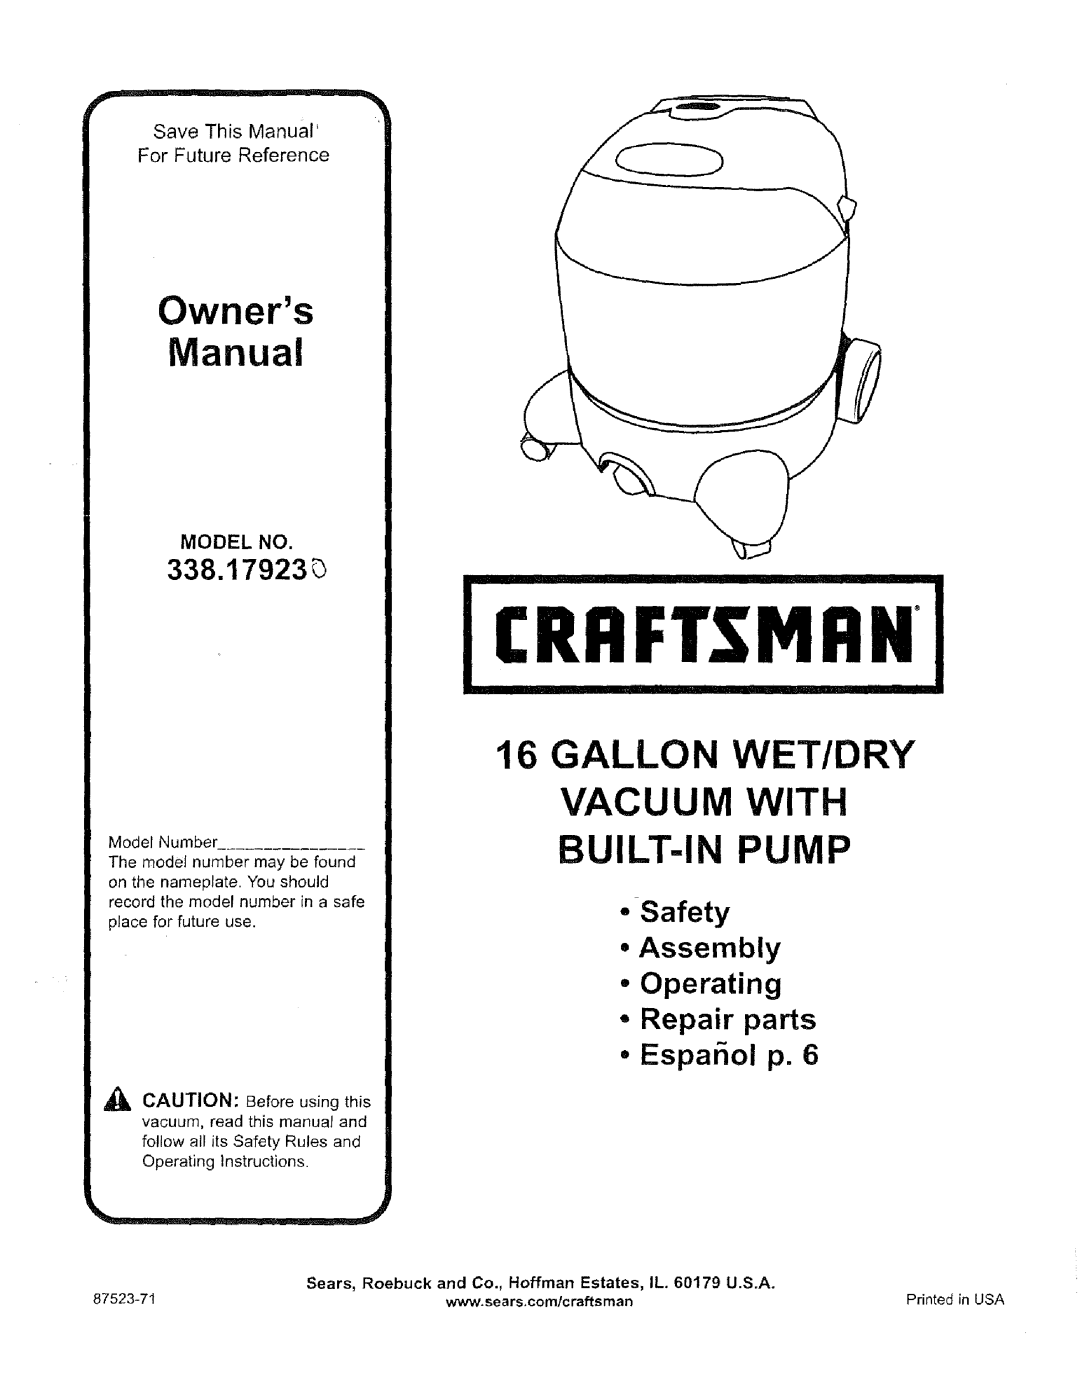 Craftsman 338.17923 owner manual o-Safety Assembly, QRepair parts, Model No, Craft.Tmfin, Operating, EspaSol p, 87523-71 